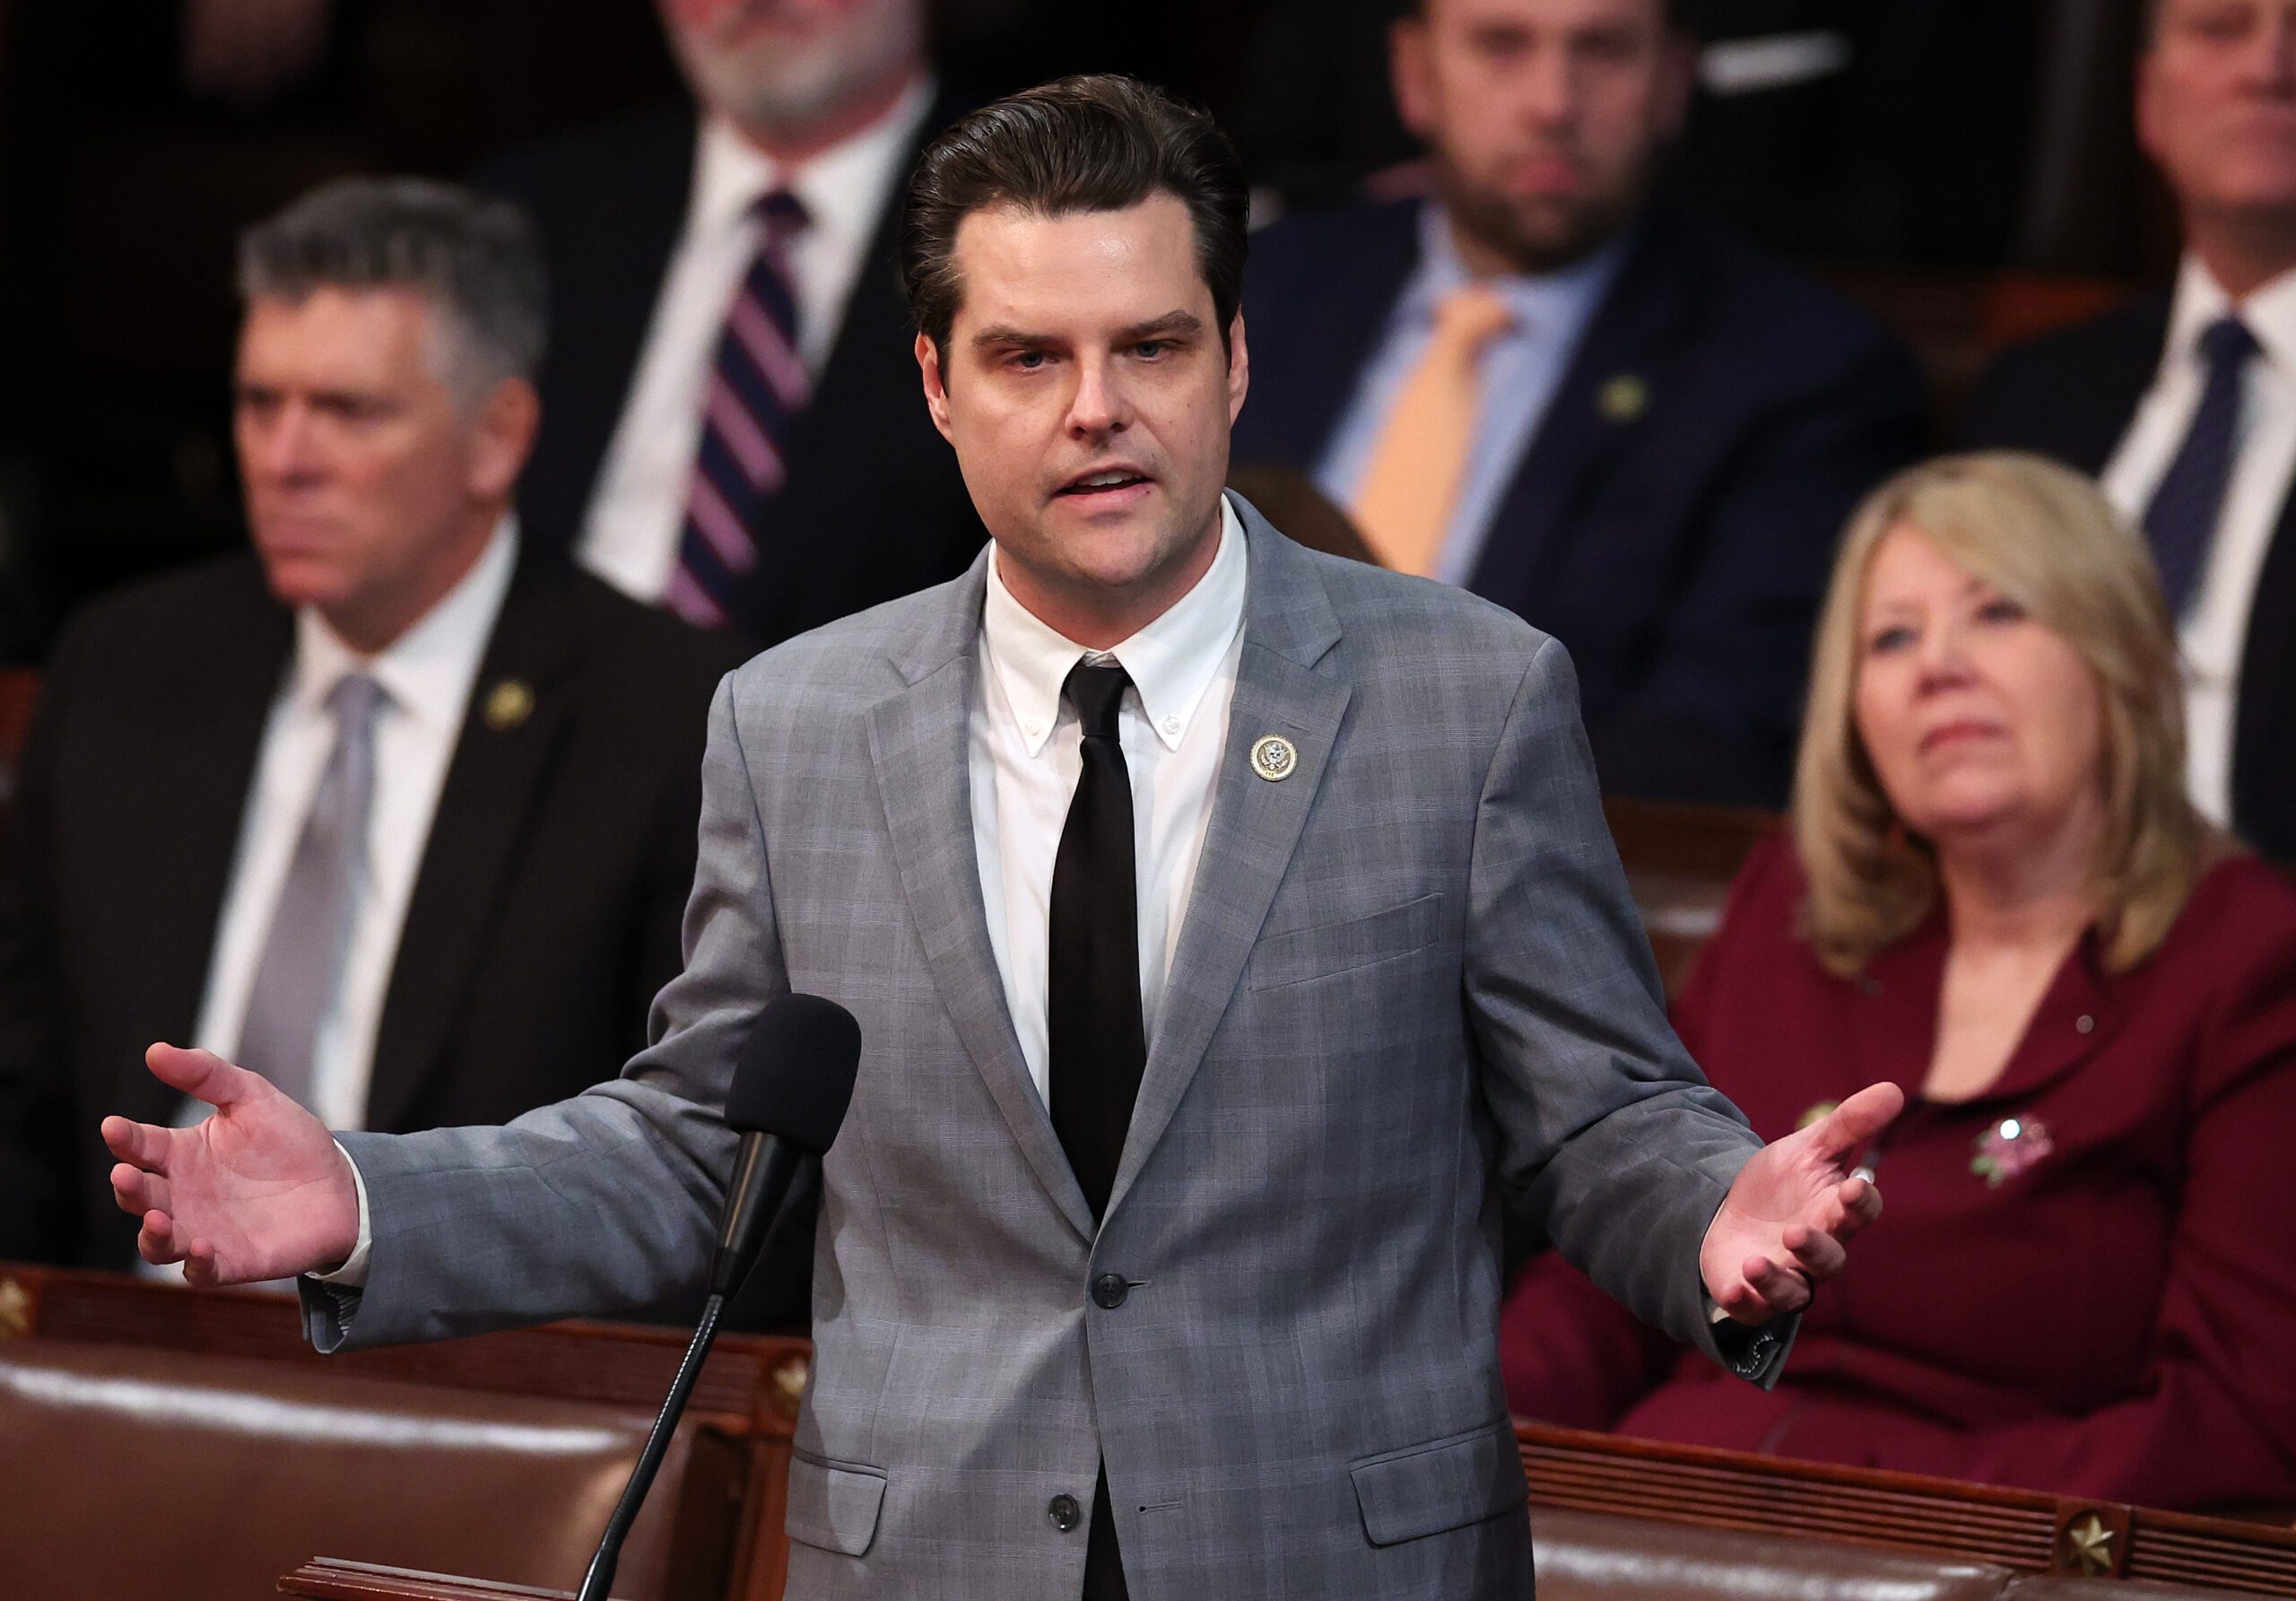 gaetz-takes-jab-at-schiff-with-‘pencil-act’-reintroduction